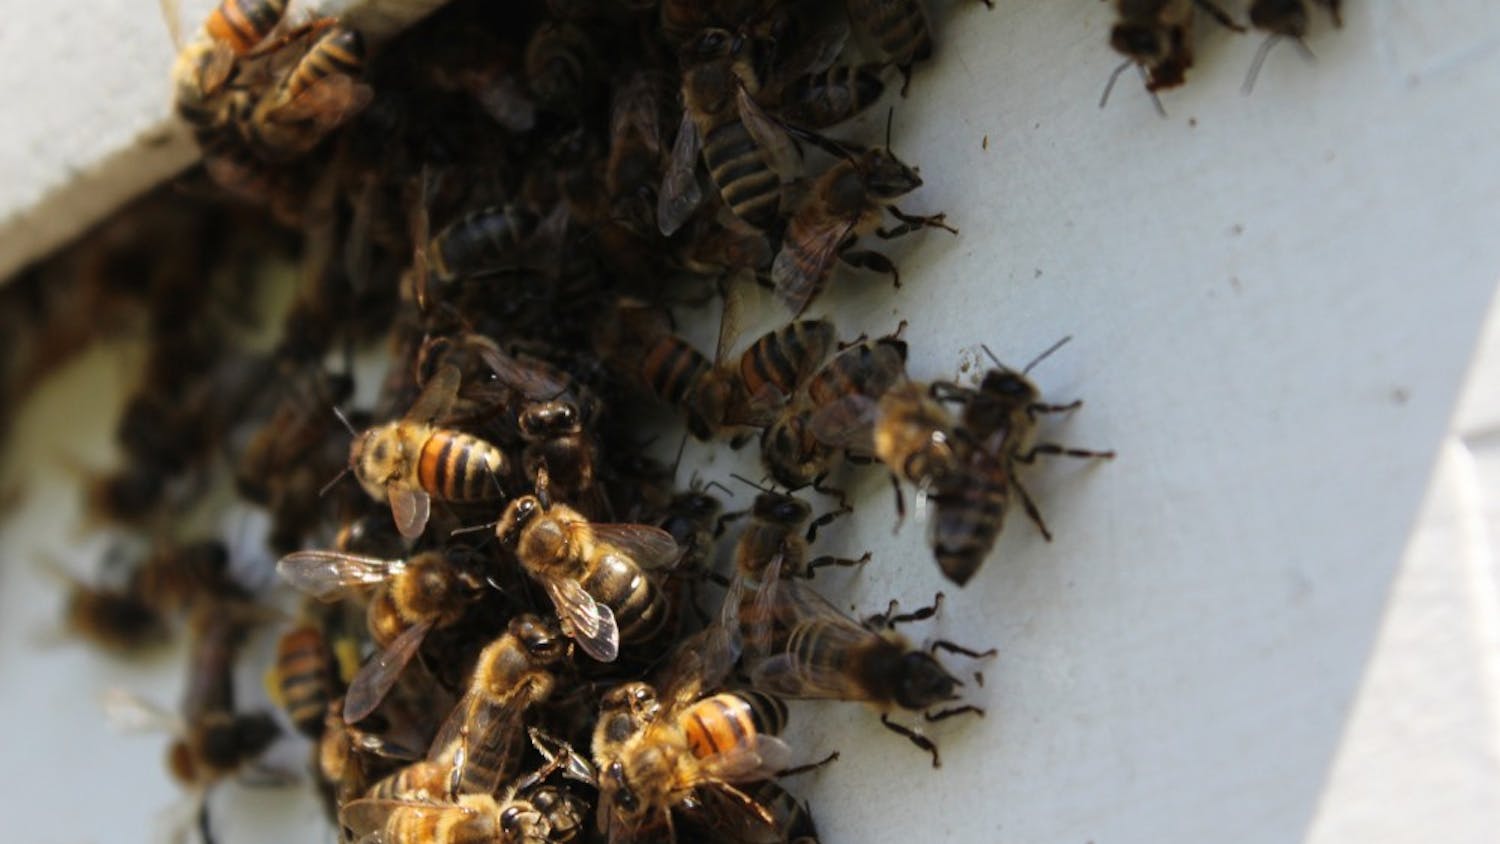 Bees gather around the entrance to retired IU biology professor George Hegeman's hive. At full strength in the summer, the hive can hold as many as 60,000 bees.